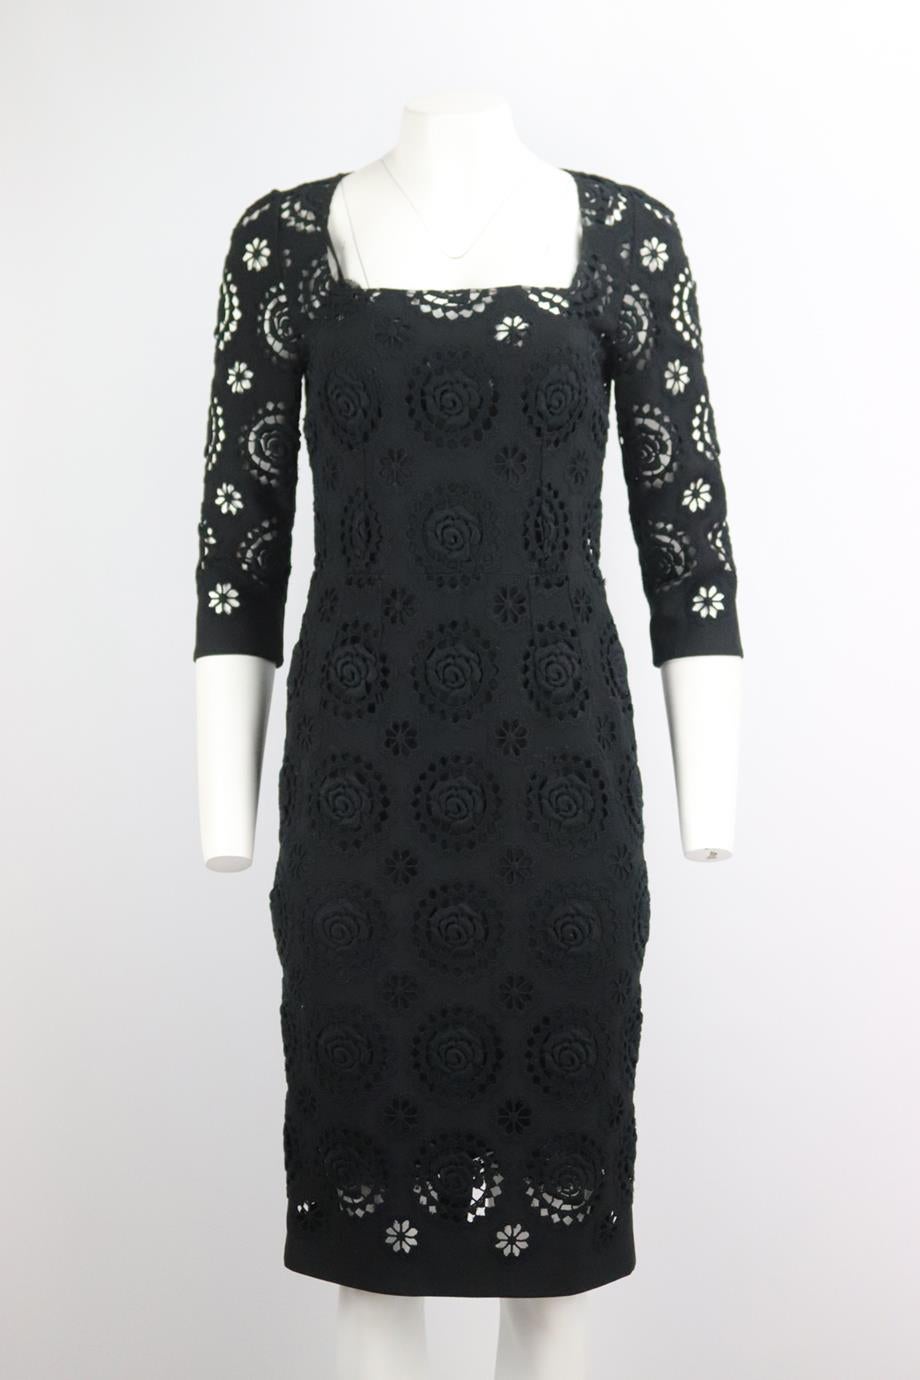 Dolce & Gabbana crochet trimmed crepe midi dress. Black. Long sleeve, square-neck. Zip fastening at back. Size: IT 40 (UK 8, US 4, FR 36). Bust: 32 in. Waist: 28 in. Hips: 36 in. Length: 41 in. Very good condition - No sign of wear; see pictures. 
